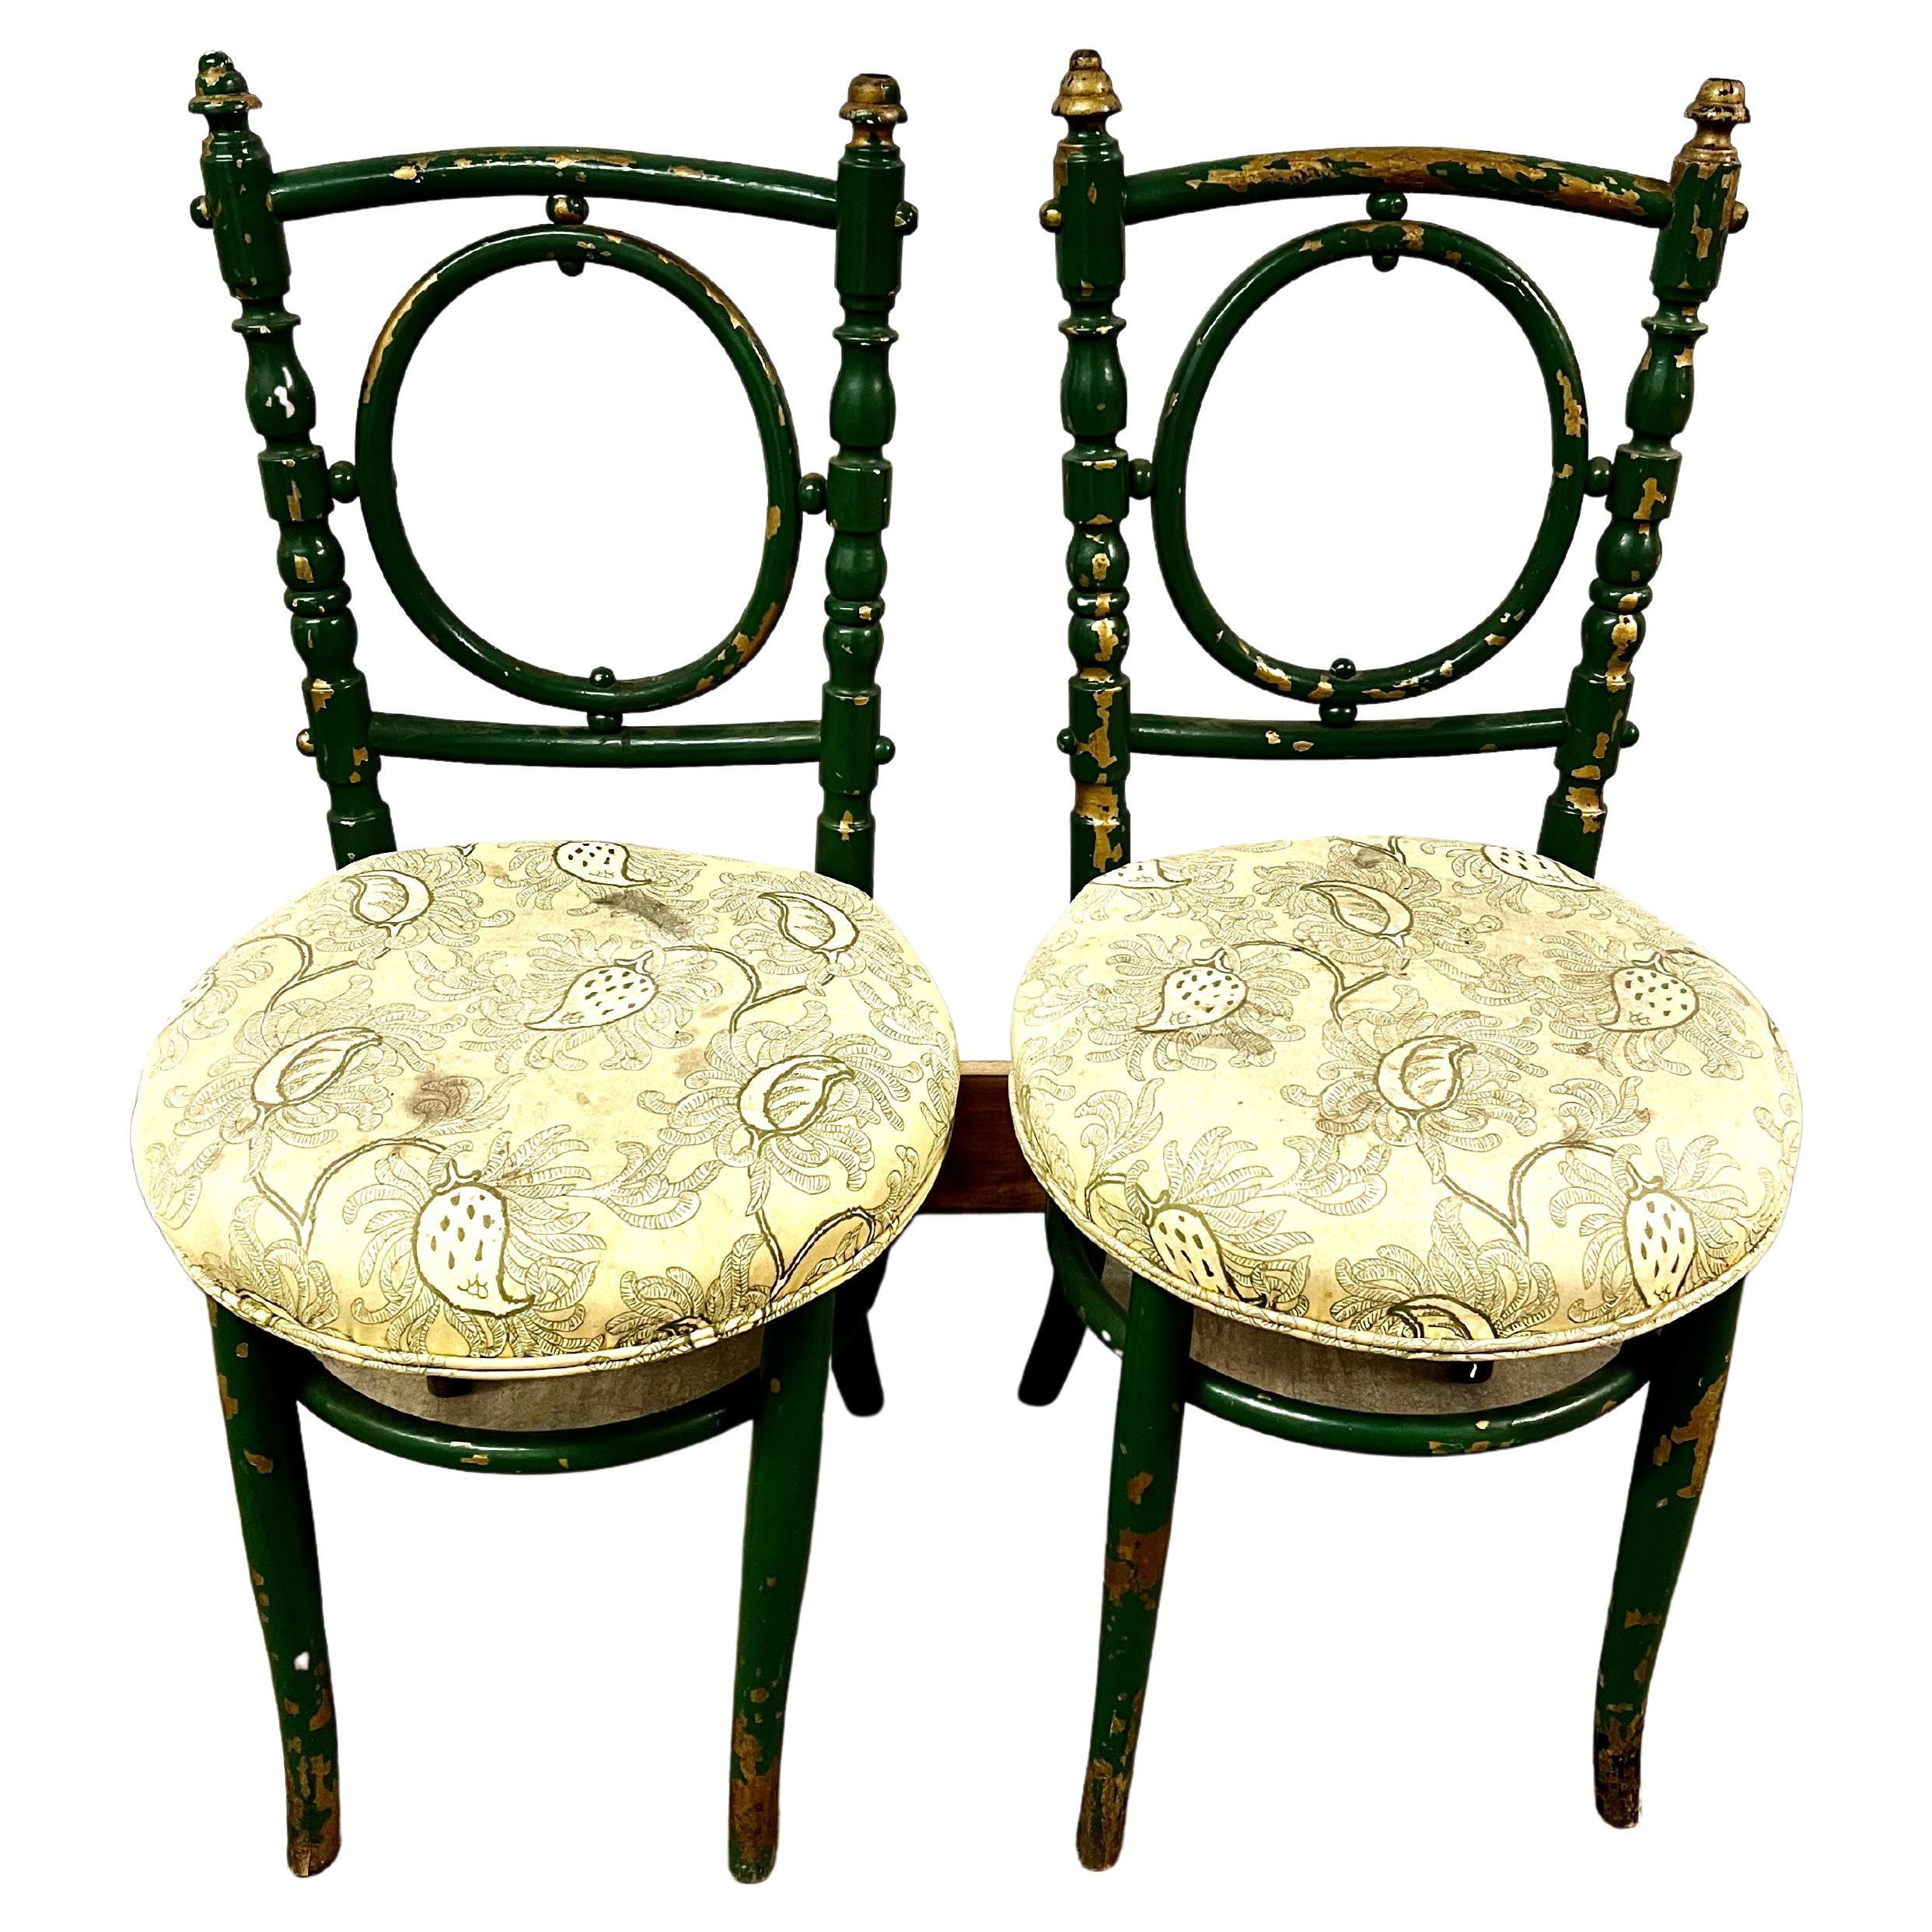 19th Century Green and Gold Bentwood Chairs with Heavy Patination